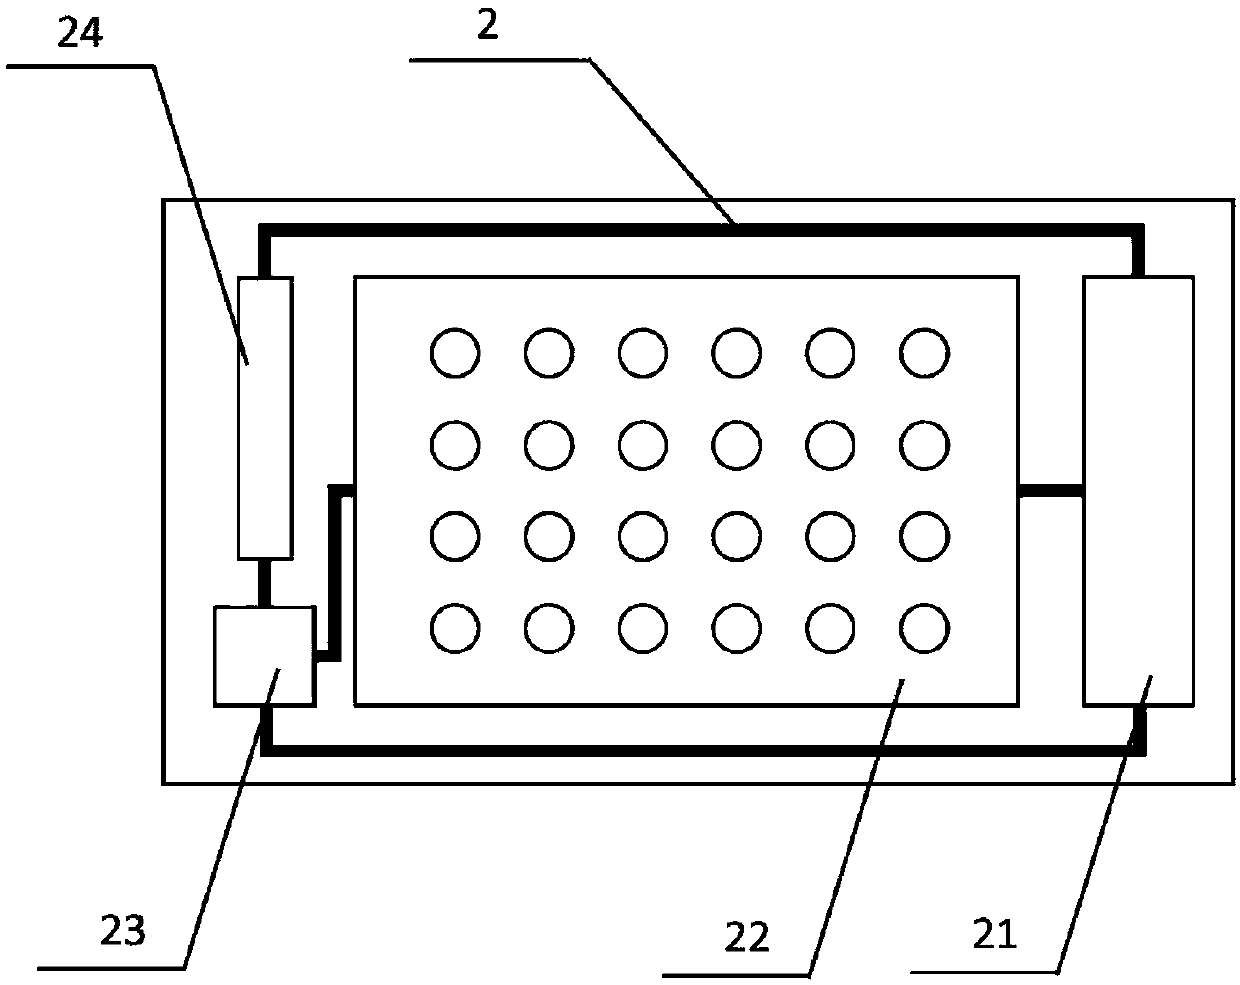 Portable bacterial colony automatic counting device and method based on a smart phone